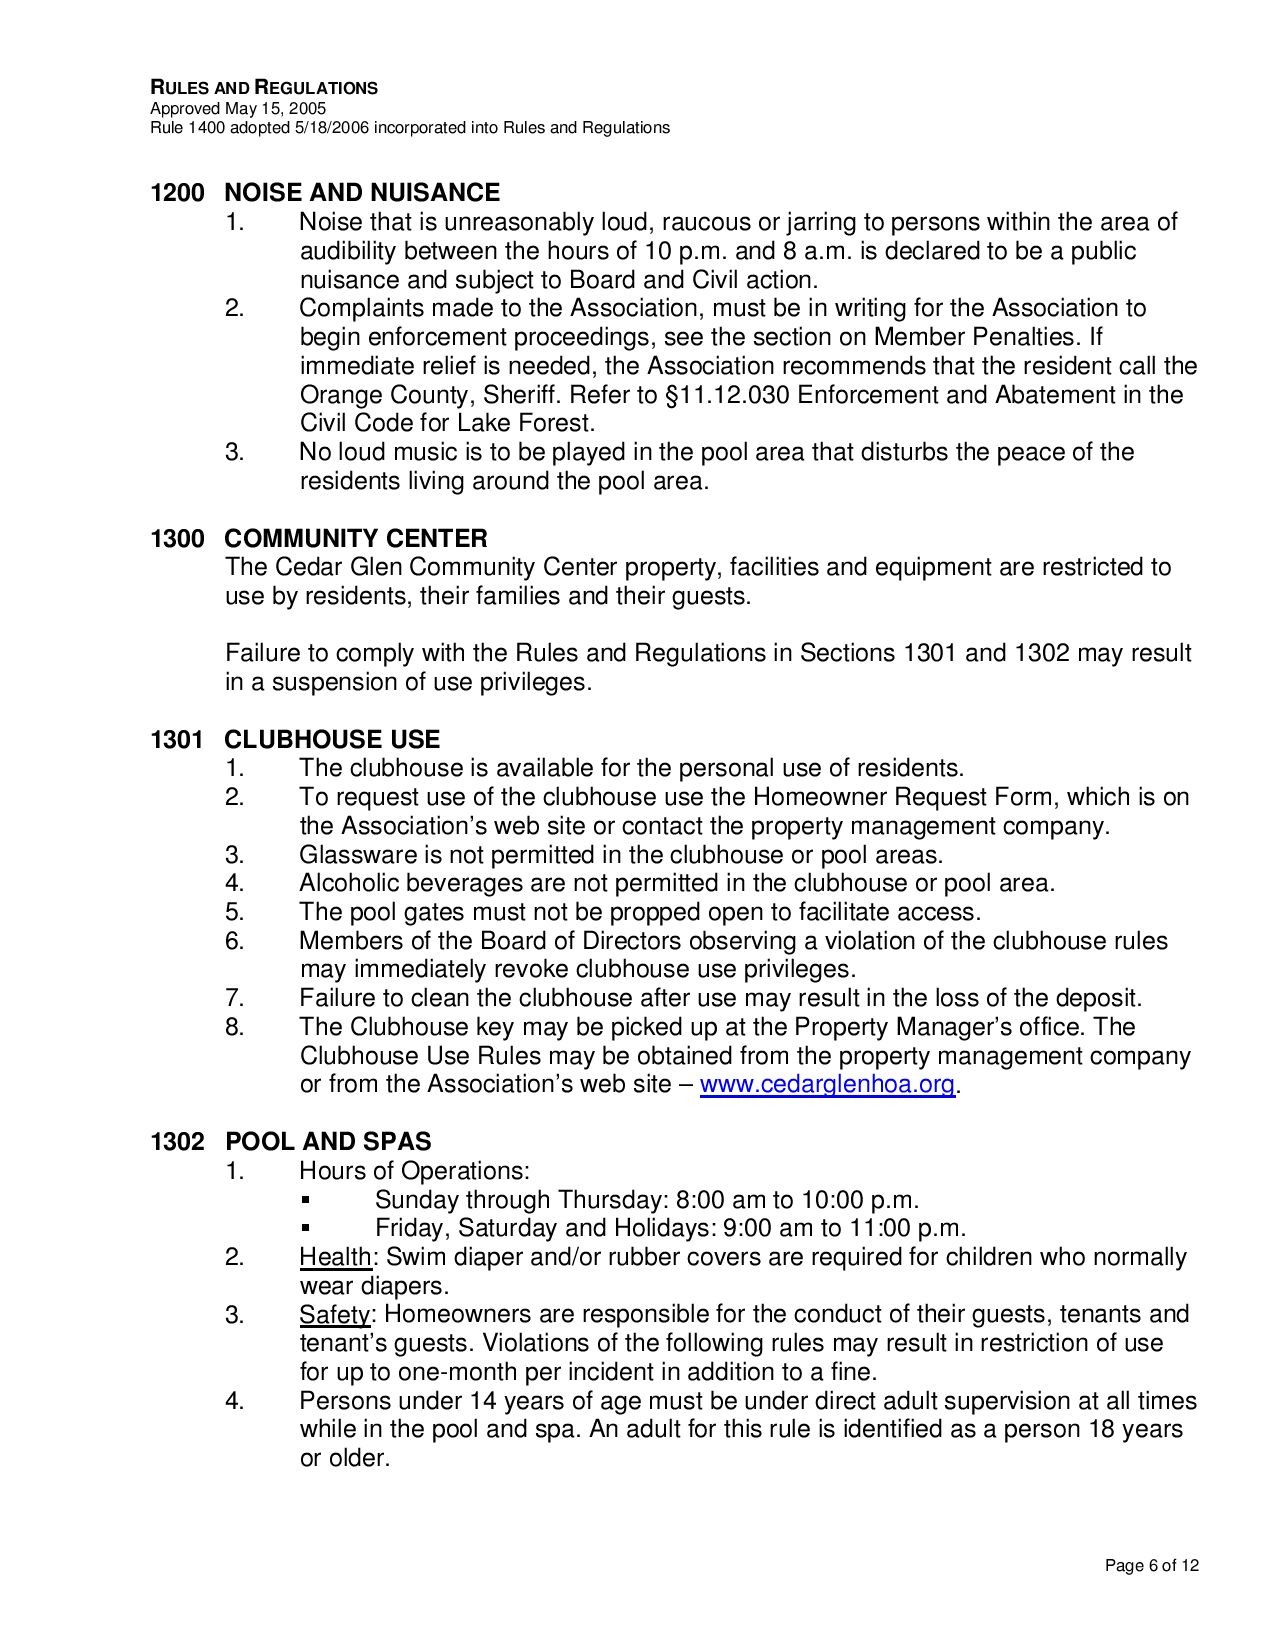 Page 6 of the HOA Rules and Regulations